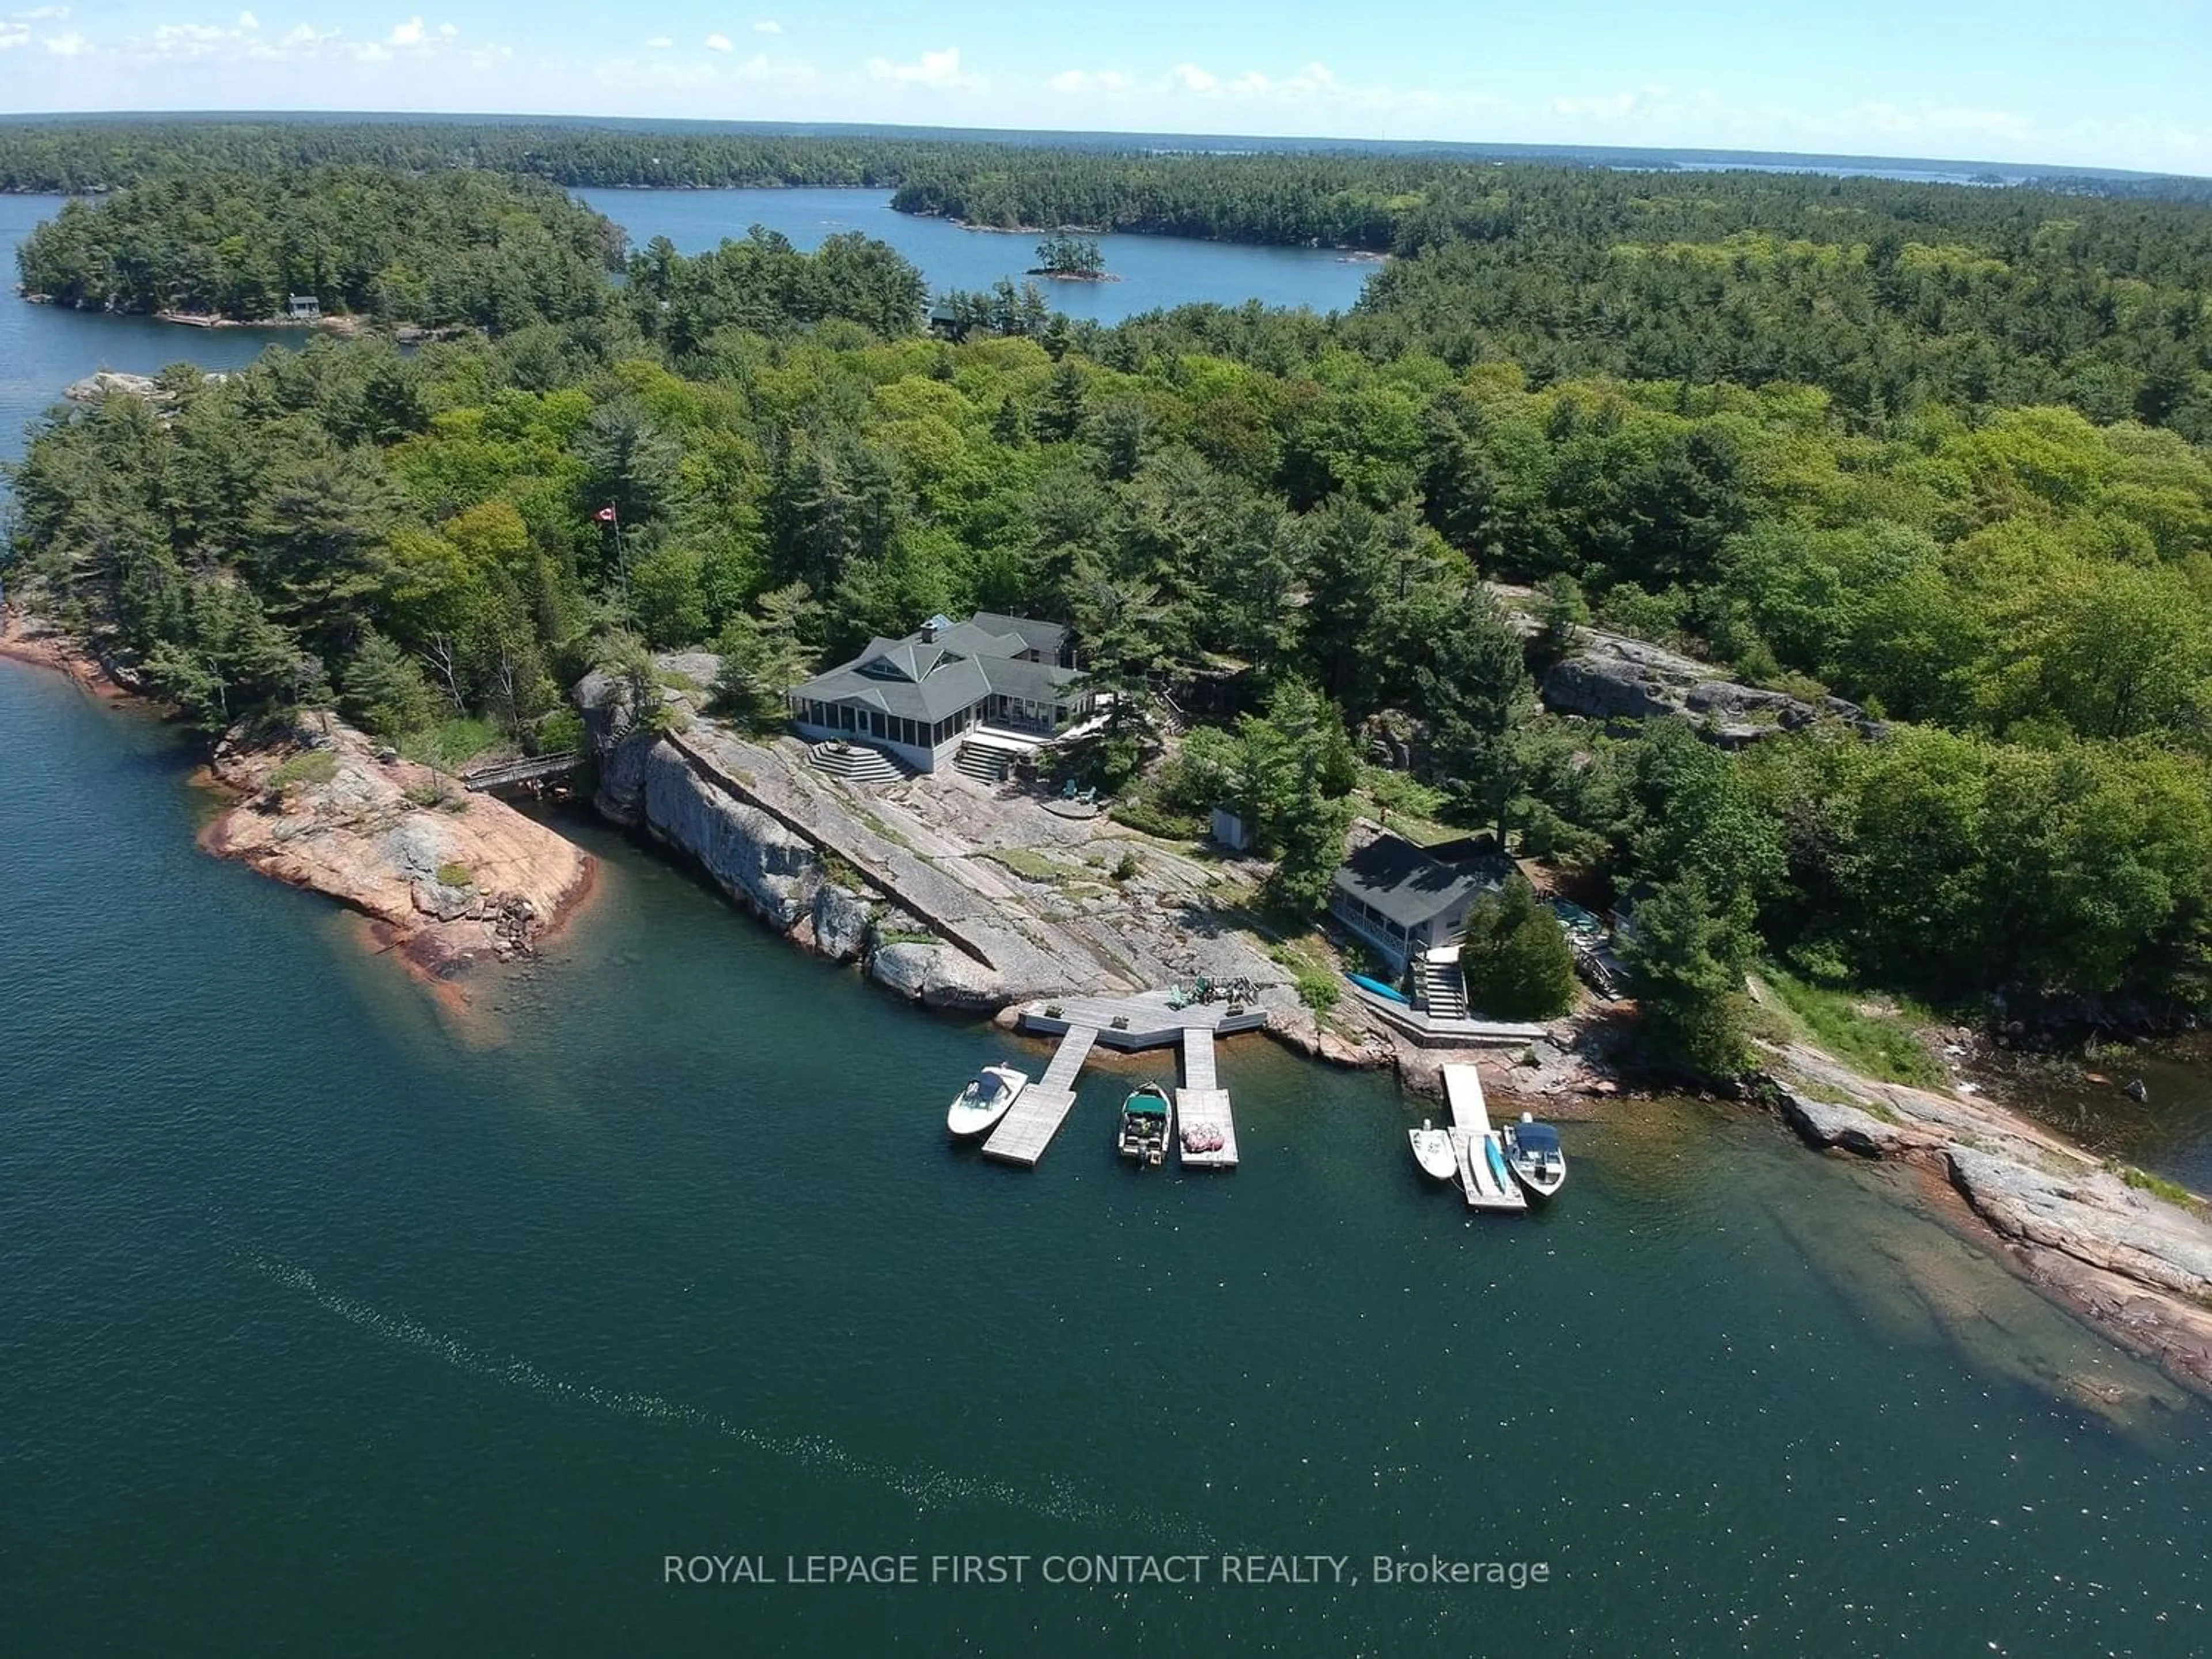 Lakeview for 91 A96 Island, The Archipelago Ontario P0G 1K0